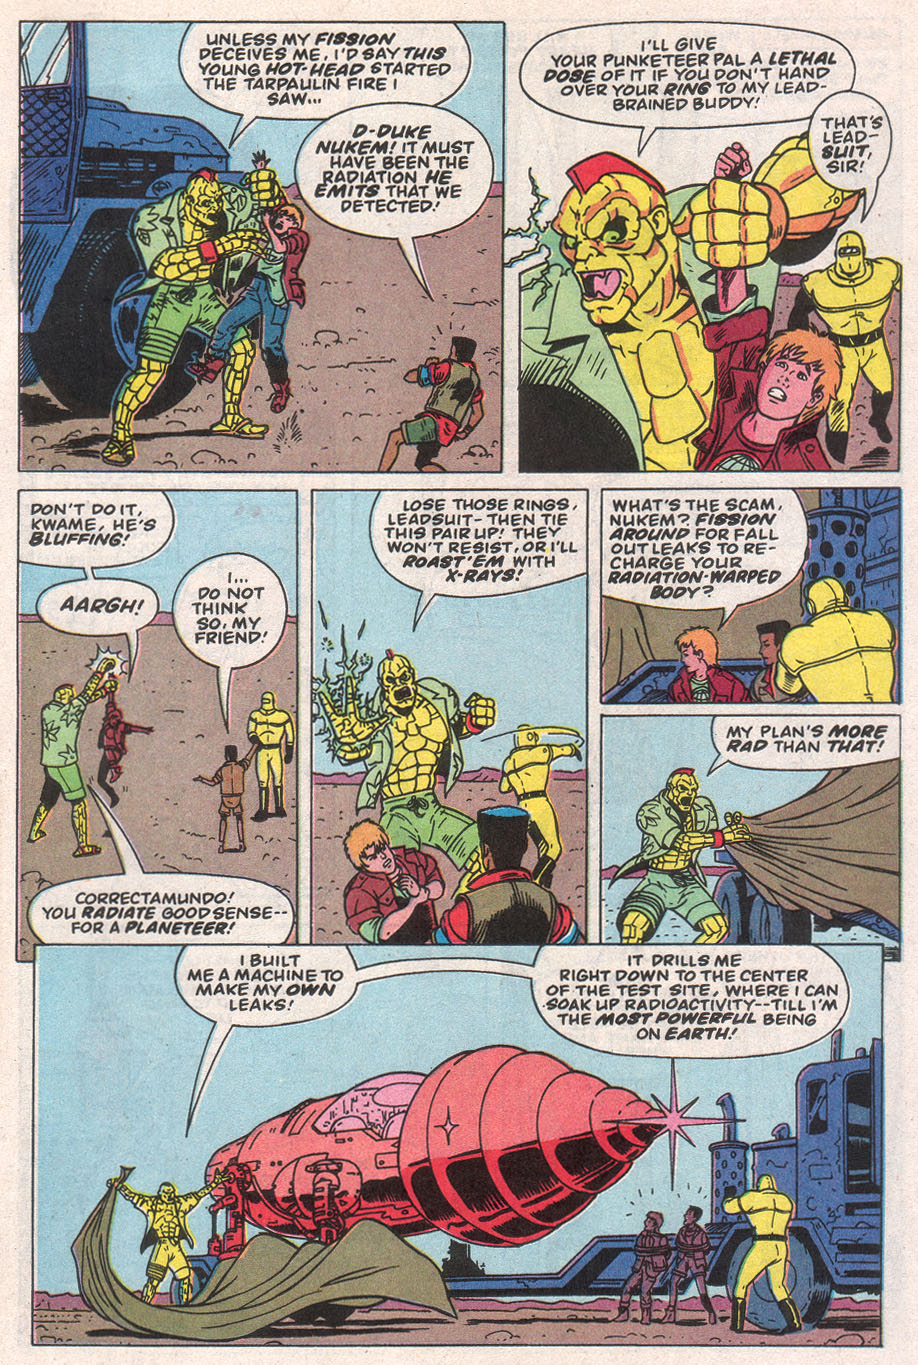 Captain Planet and the Planeteers 11 Page 27